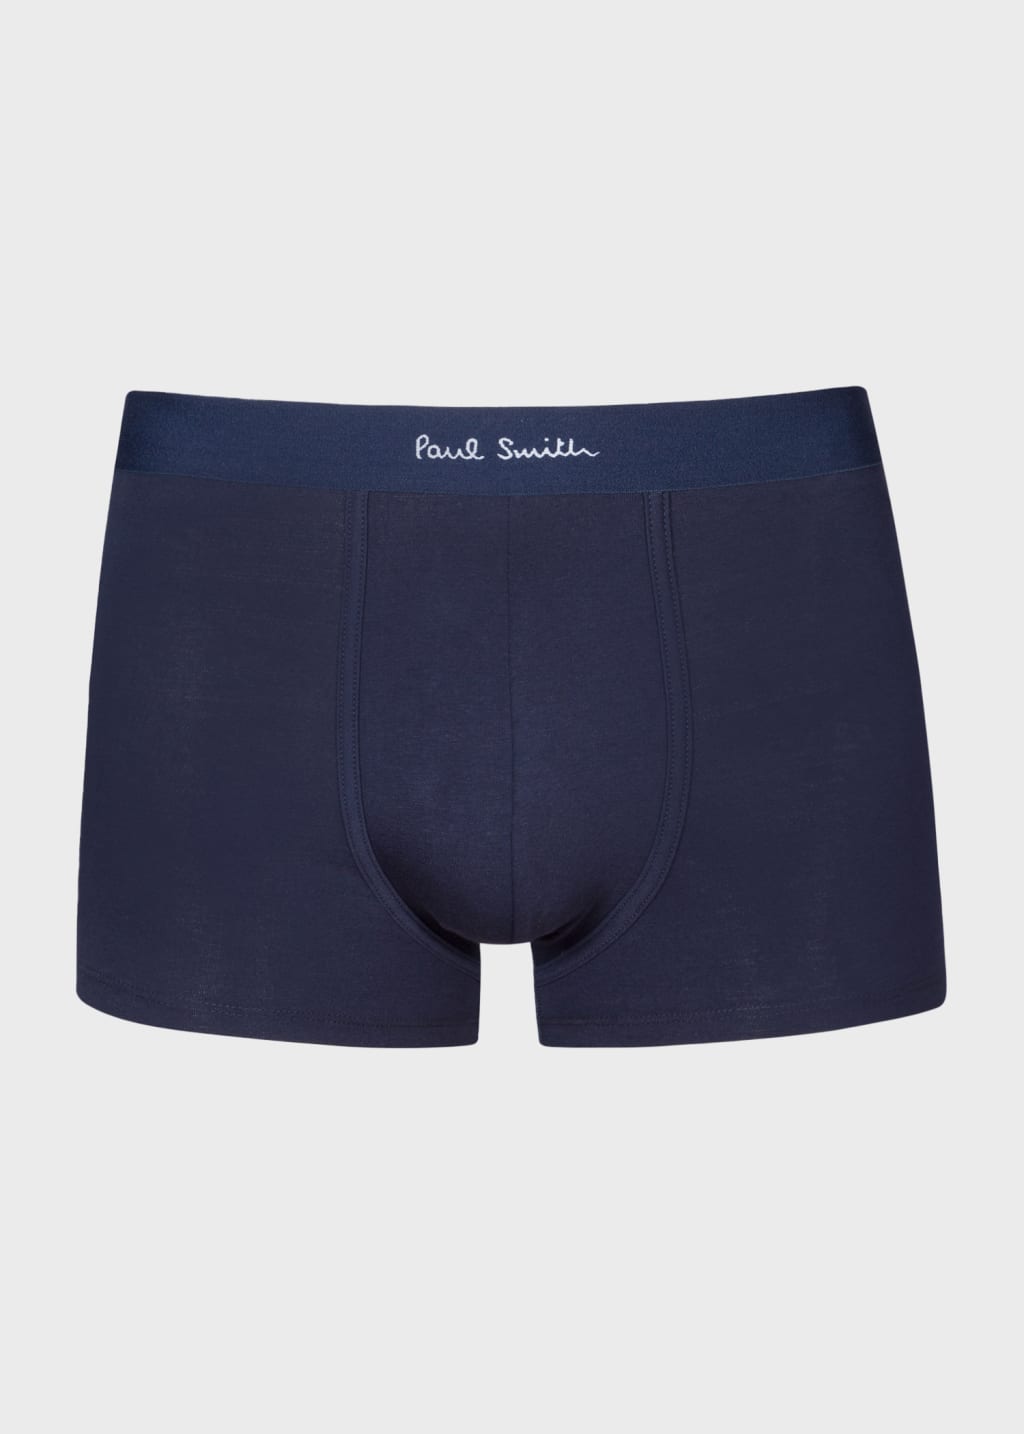 Front View - Organic-Cotton Blue 'Signature Stripe' Mix Boxer Briefs Three Pack Paul Smith